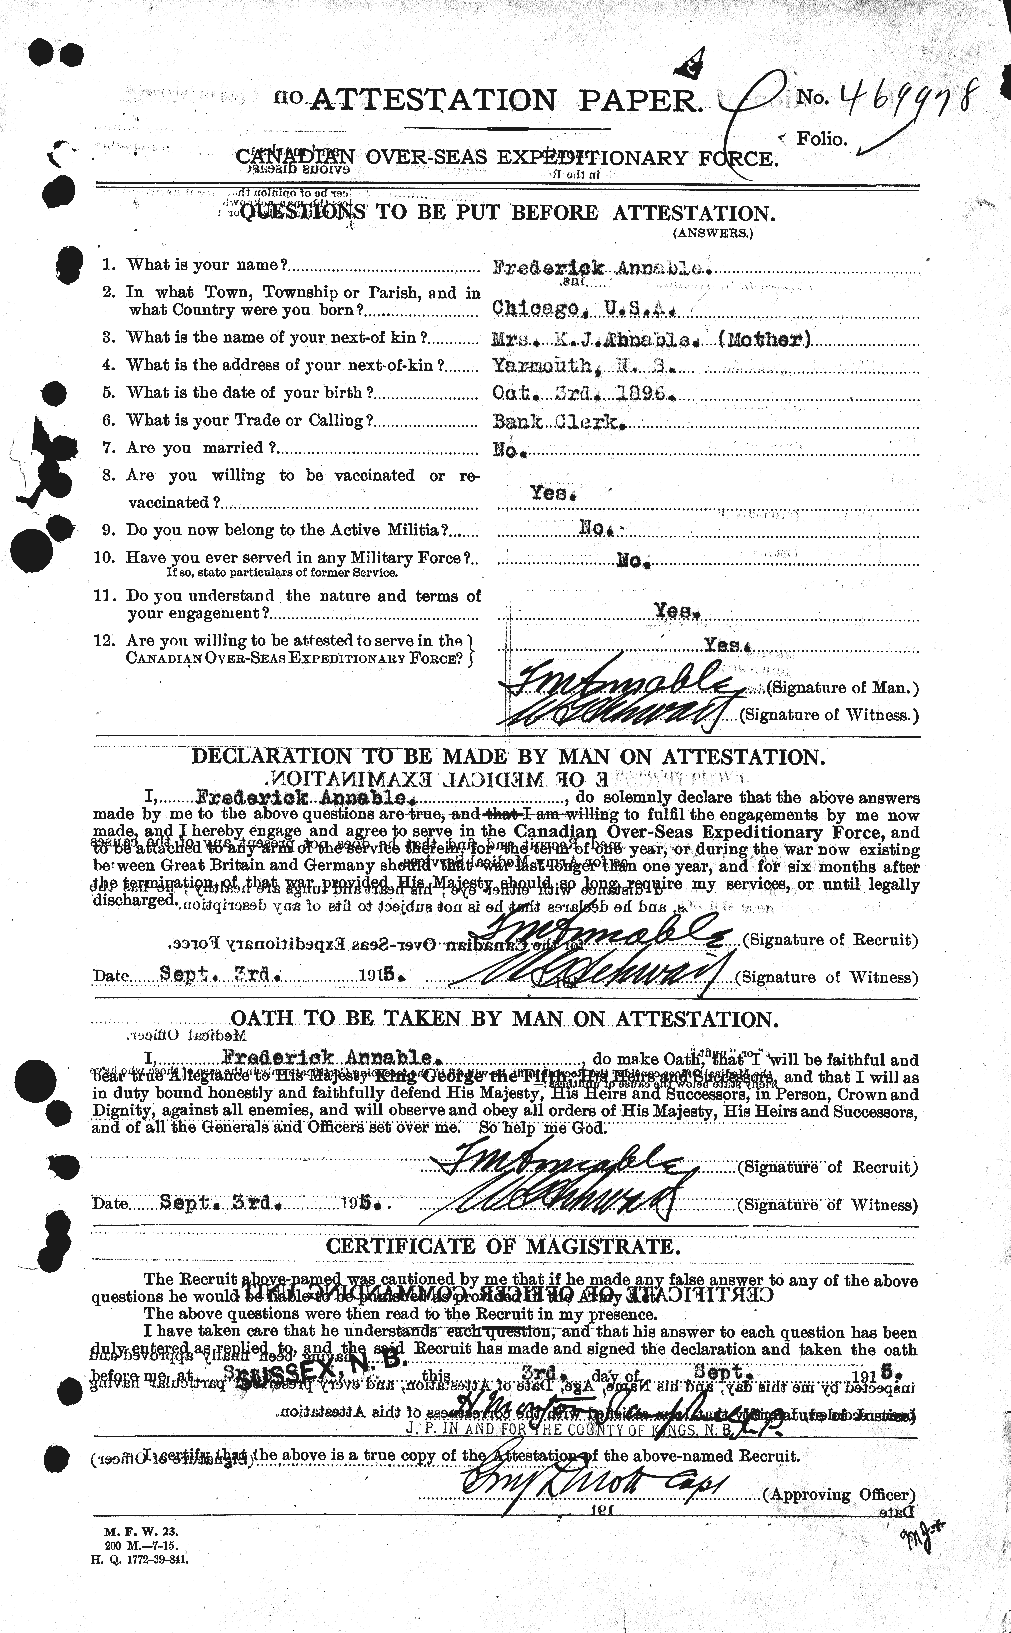 Personnel Records of the First World War - CEF 212510a